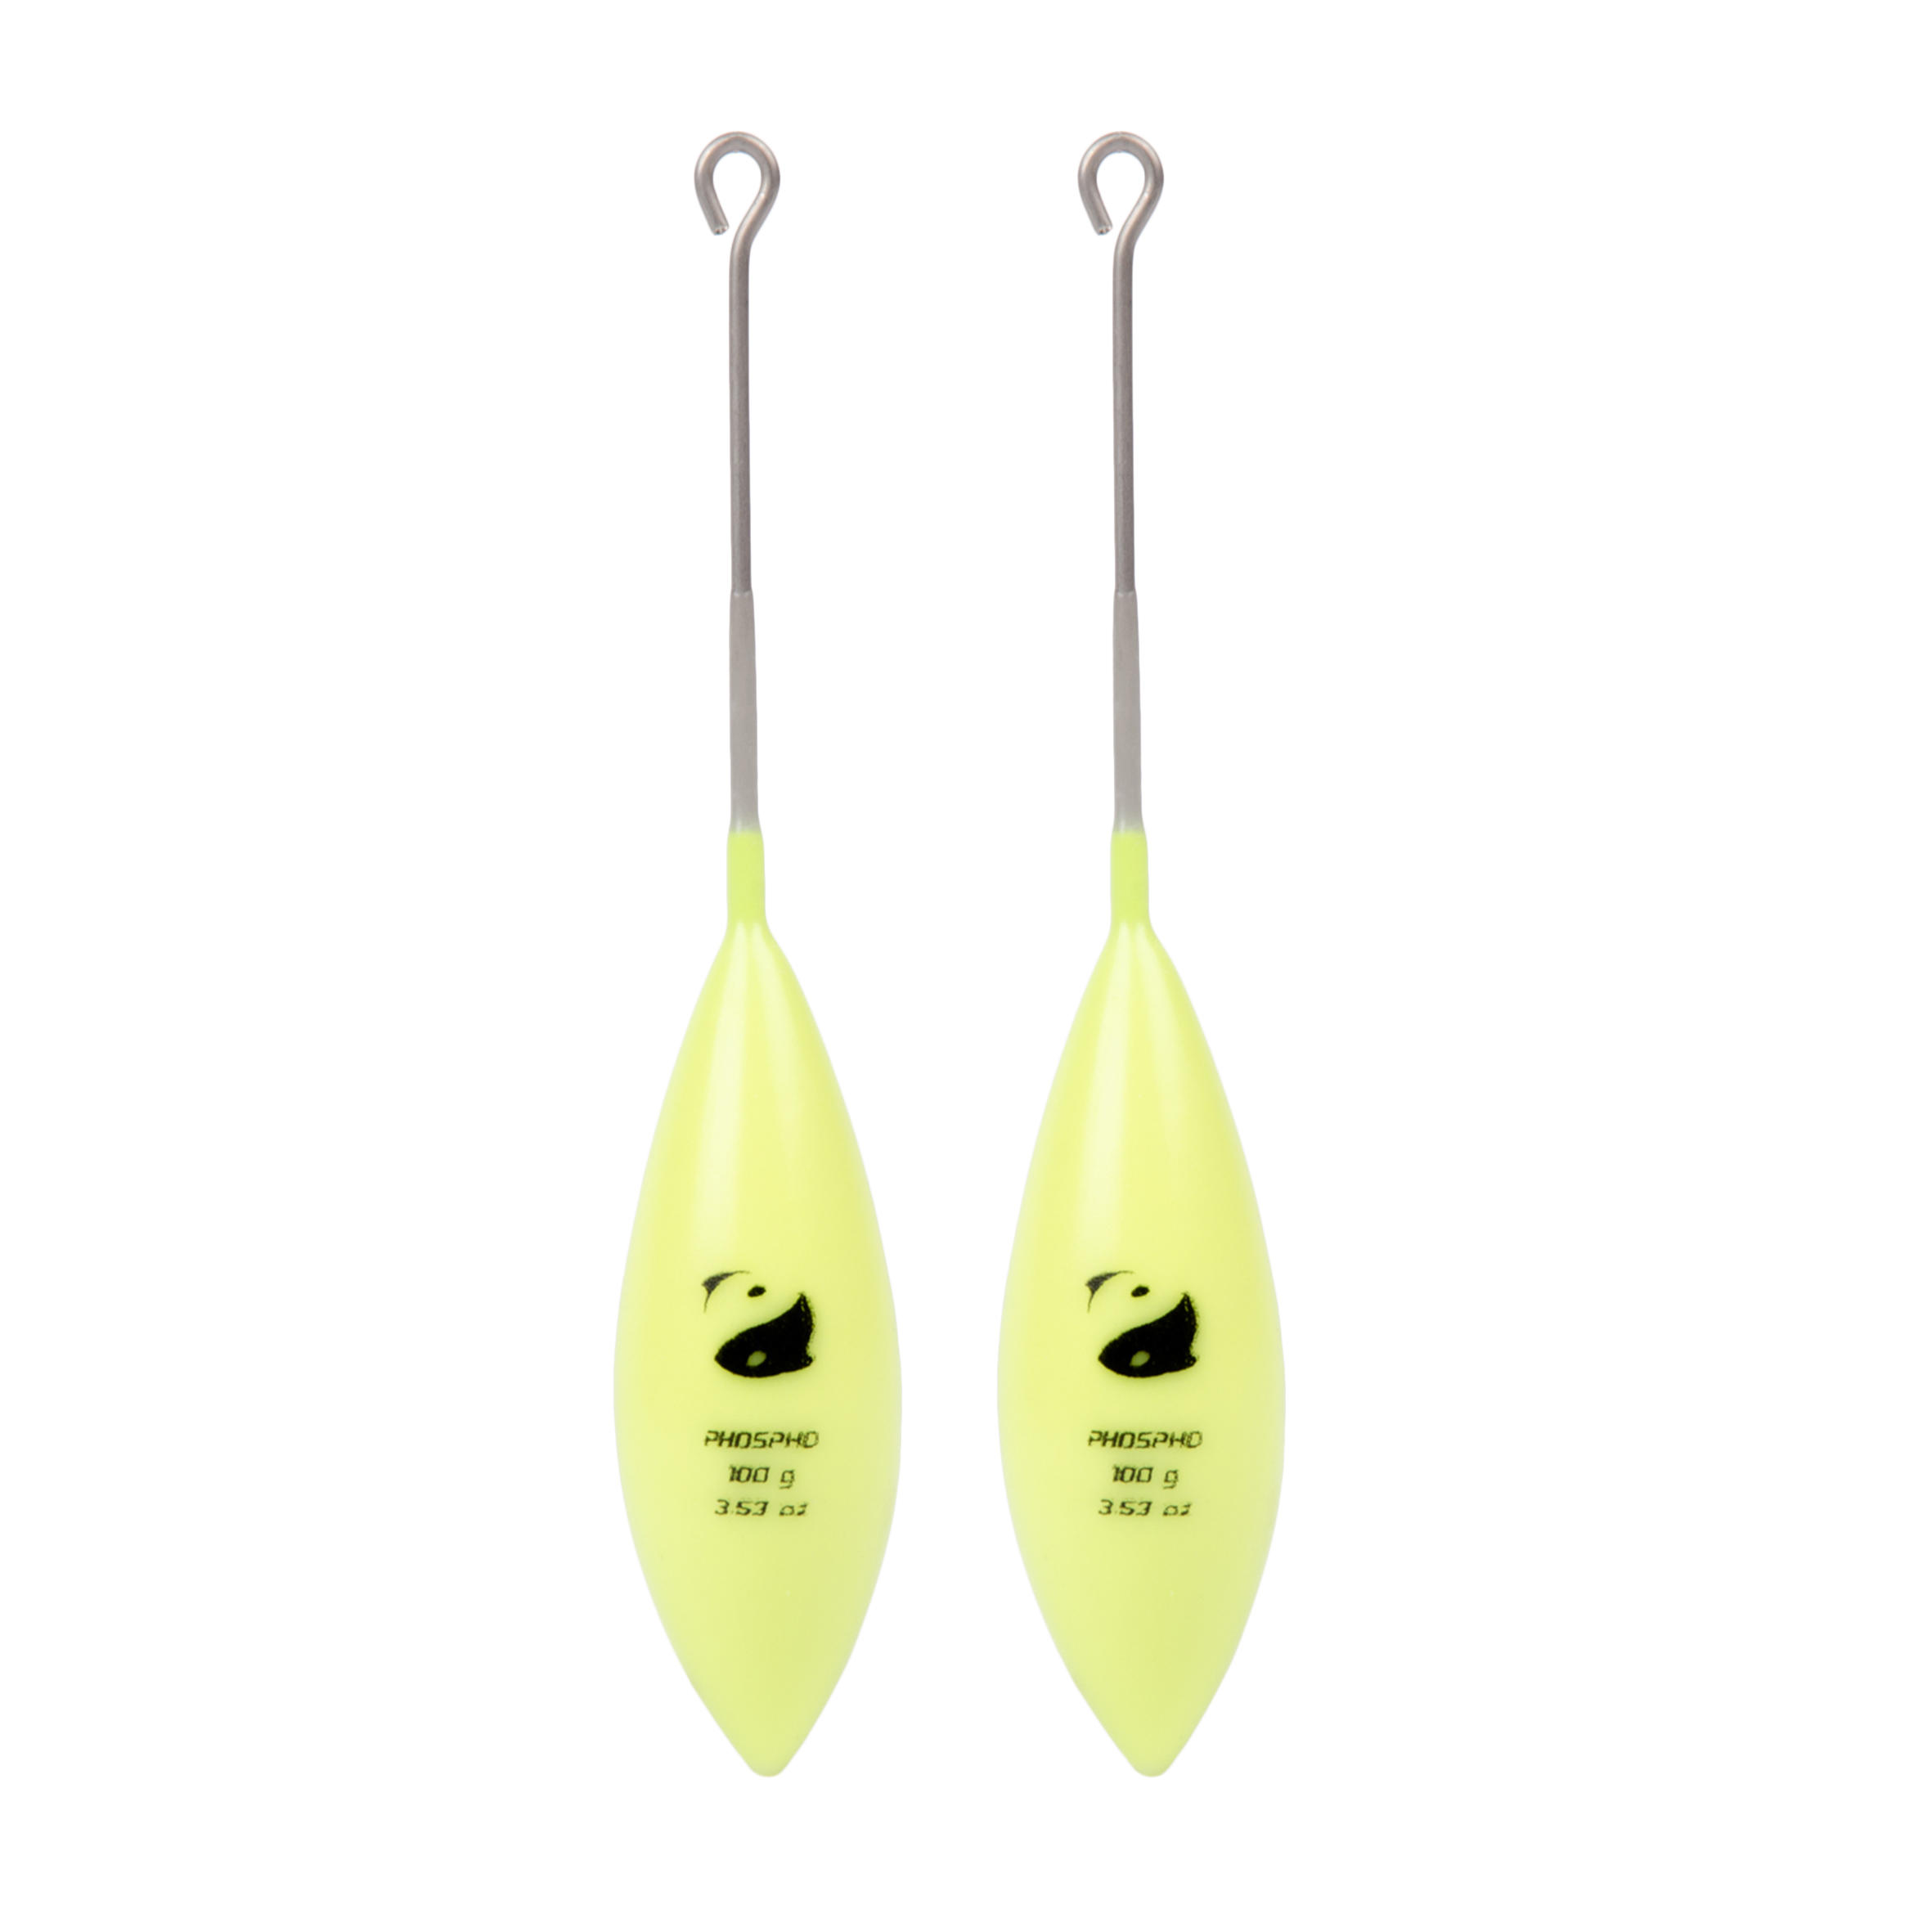 Fishing Surfcasting Bomb Sinker with Long Tail x2 - Phosphorescent Yellow 2/10